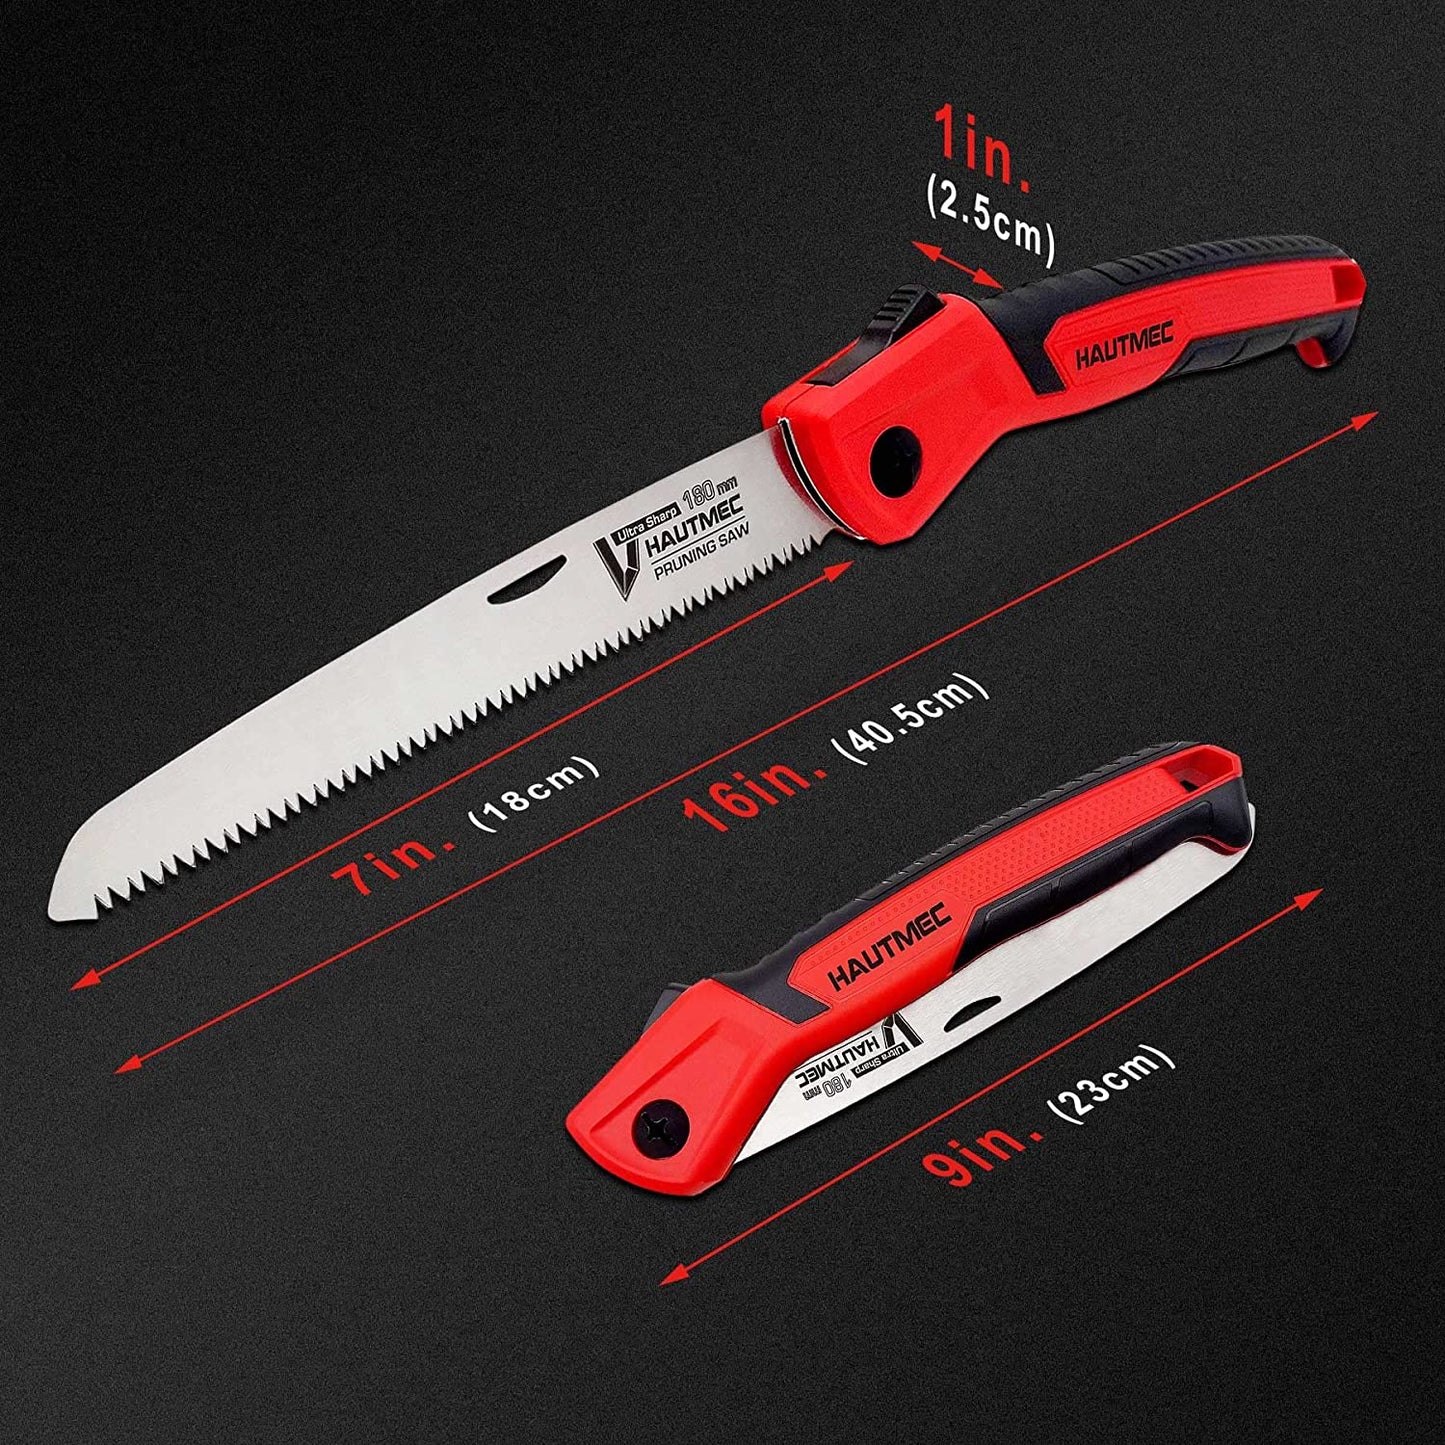 HAUTMEC 7 inch Folding Saw, SK-5 Steel and Triple-ground Teeth, Heavy Duty Single-Hand Blade Hand Saw for Wood Camping, Dry Wood Pruning Saw, for Garden Camping, Hunting and Bushcraft HT0135-PS